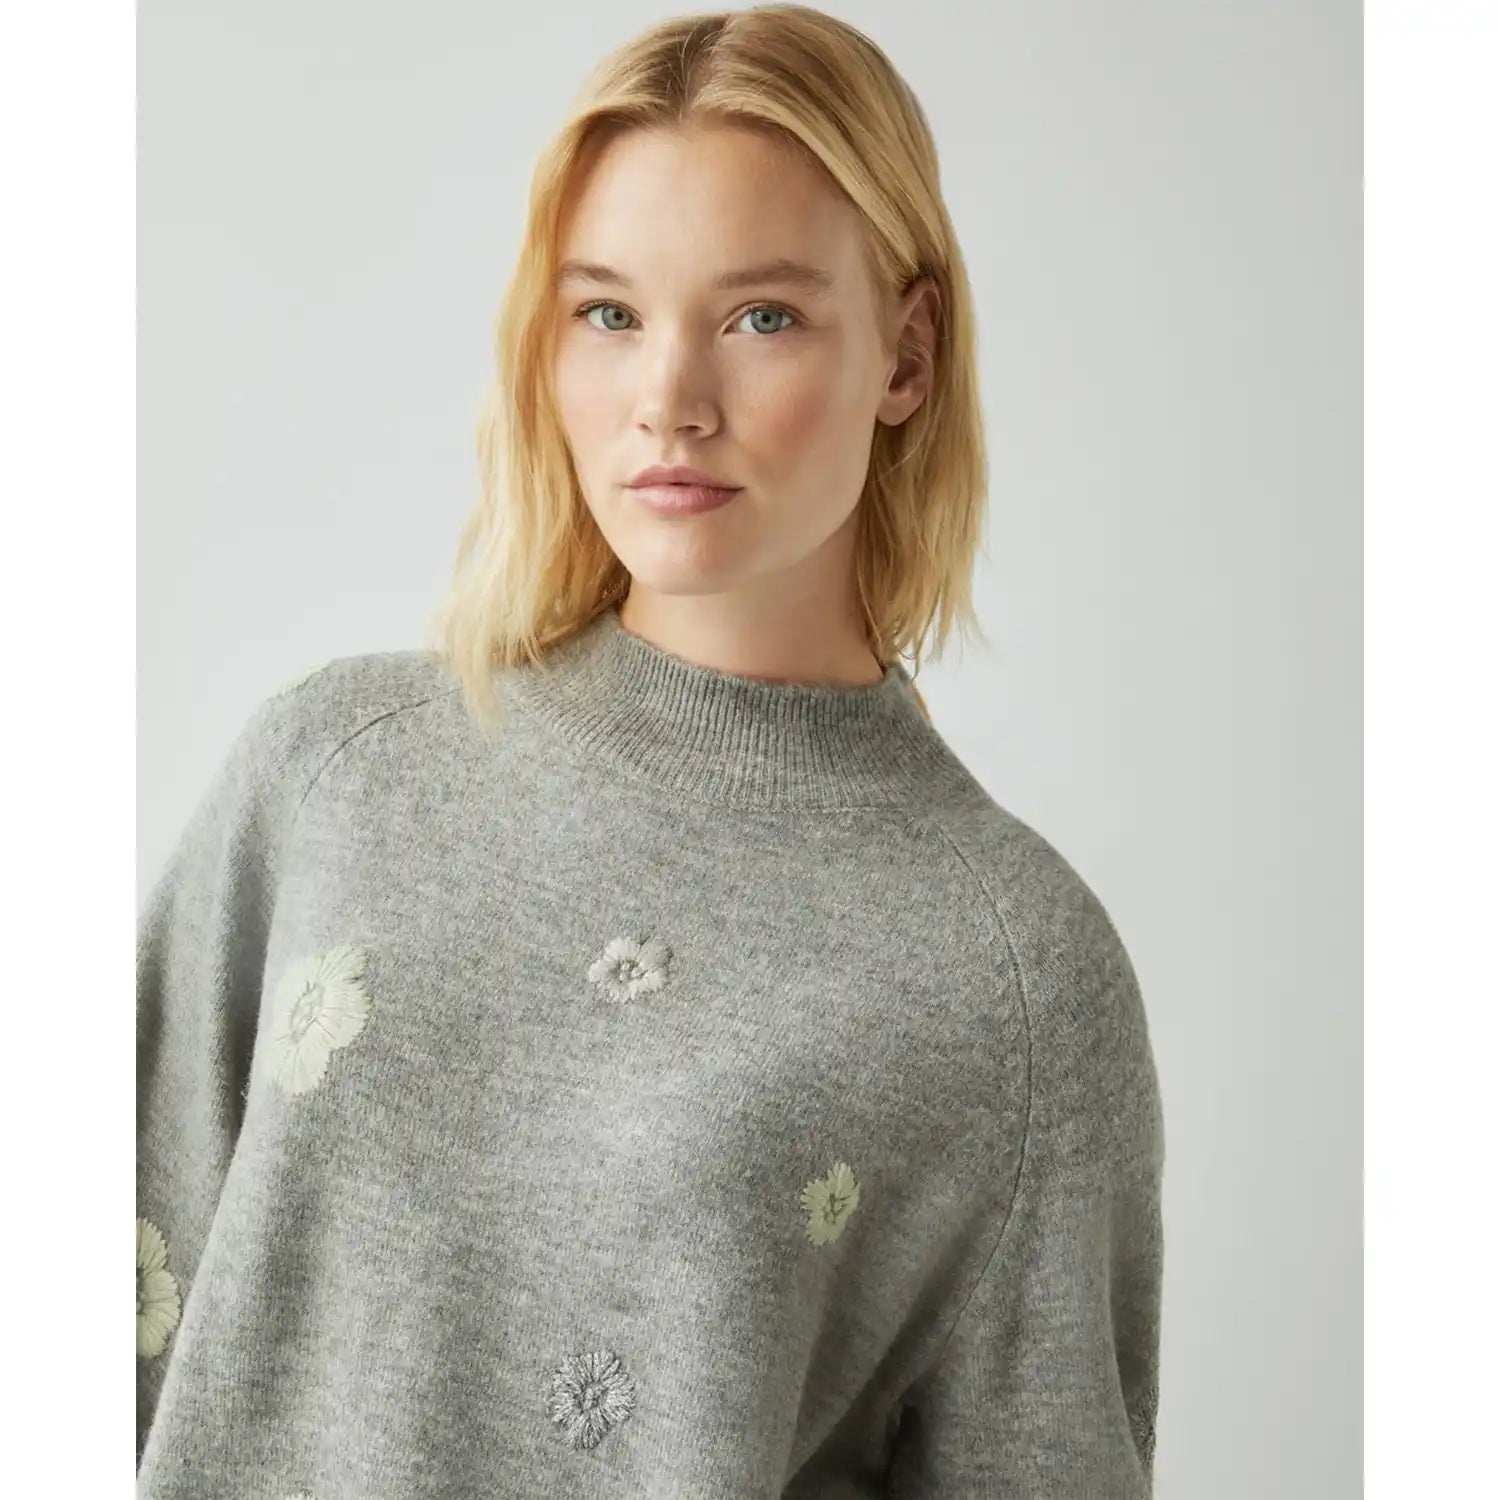 Couchel Knitted Sweater With Embroidery - Light Grey 1 Shaws Department Stores